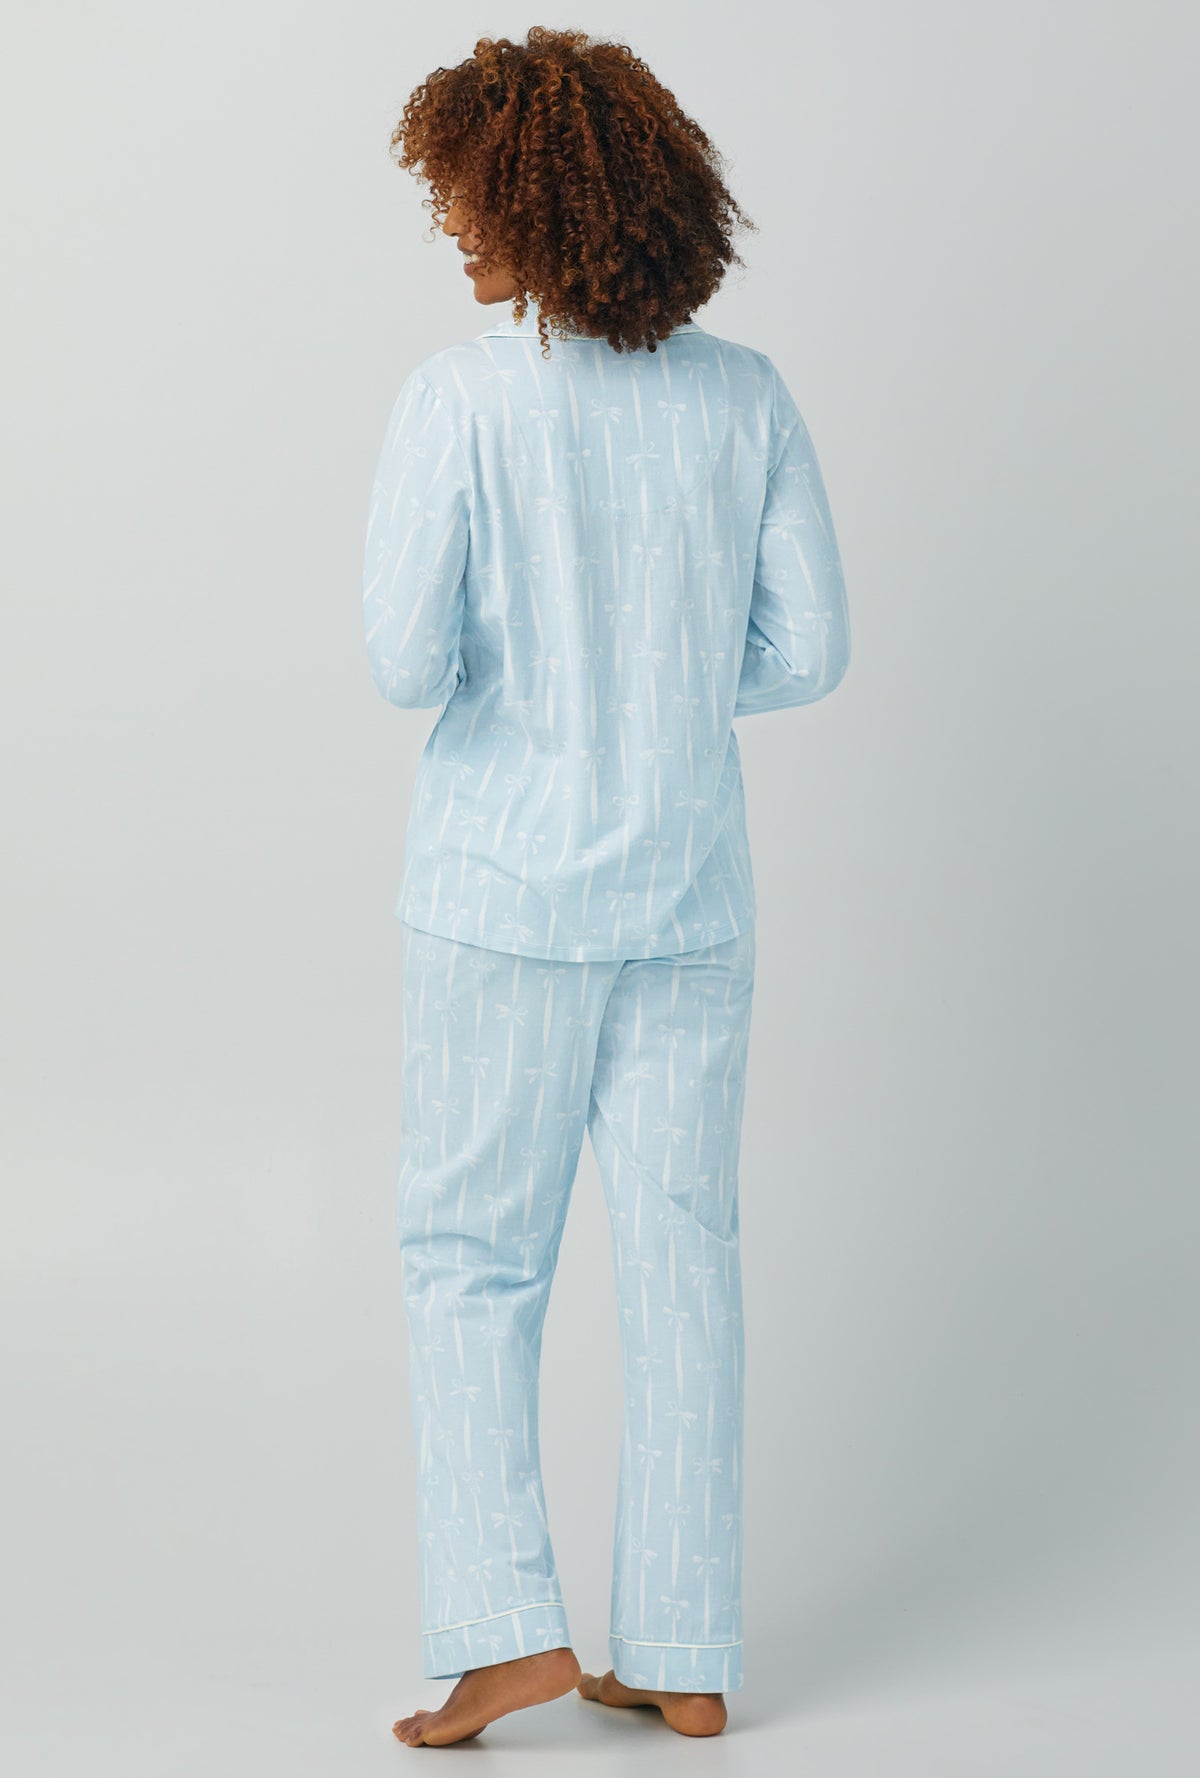 A lady wearing Long Sleeve Classic Stretch Jersey PJ Set with tying the knot print